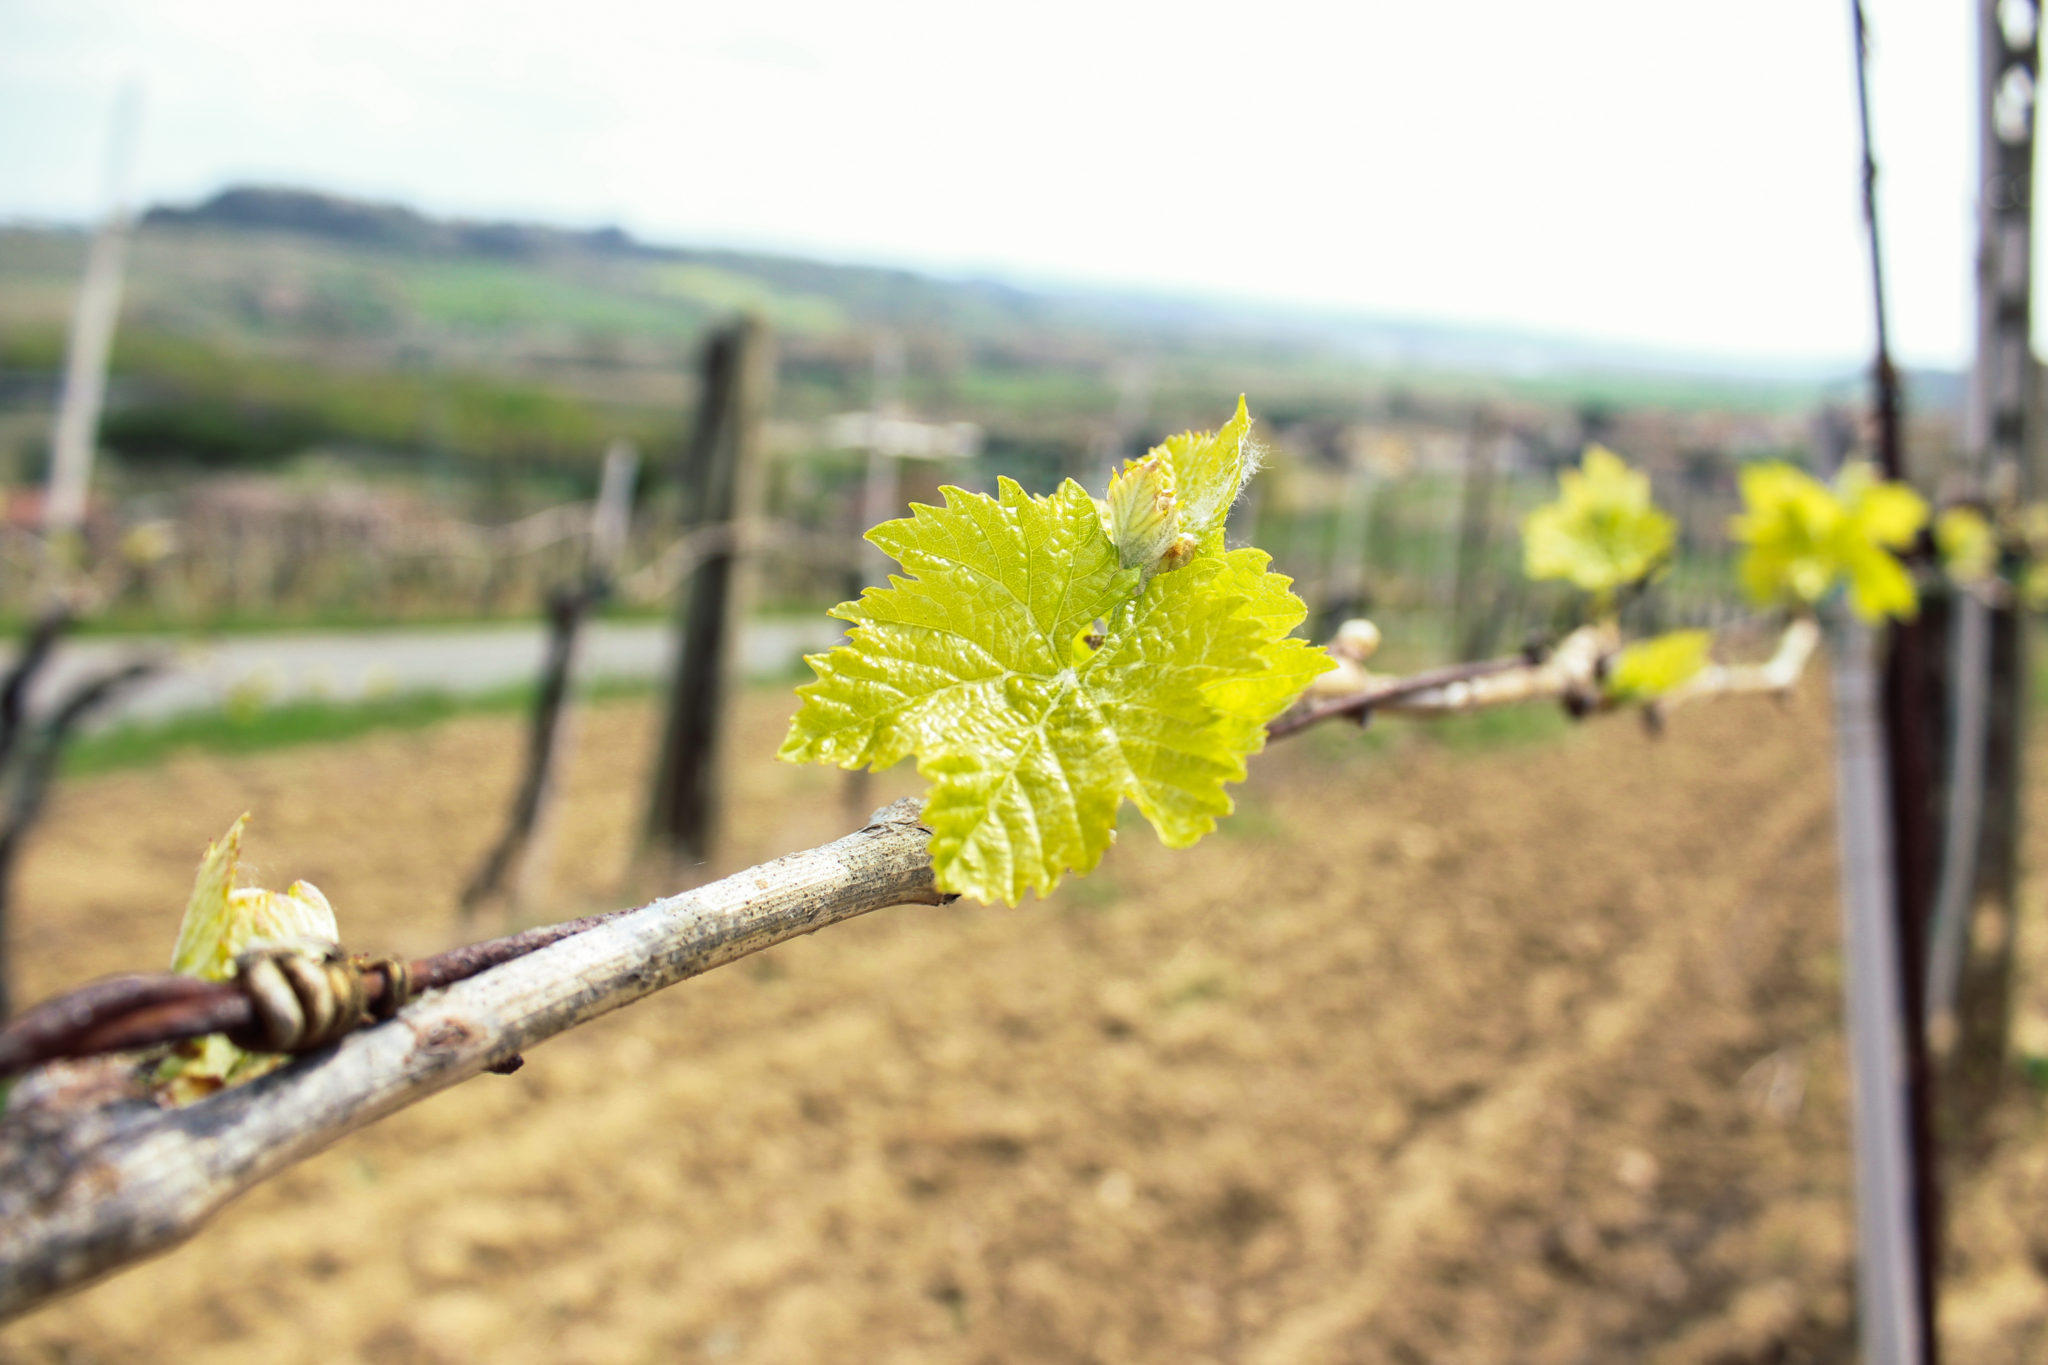 The budbreak through the rows of Torciano vineyards